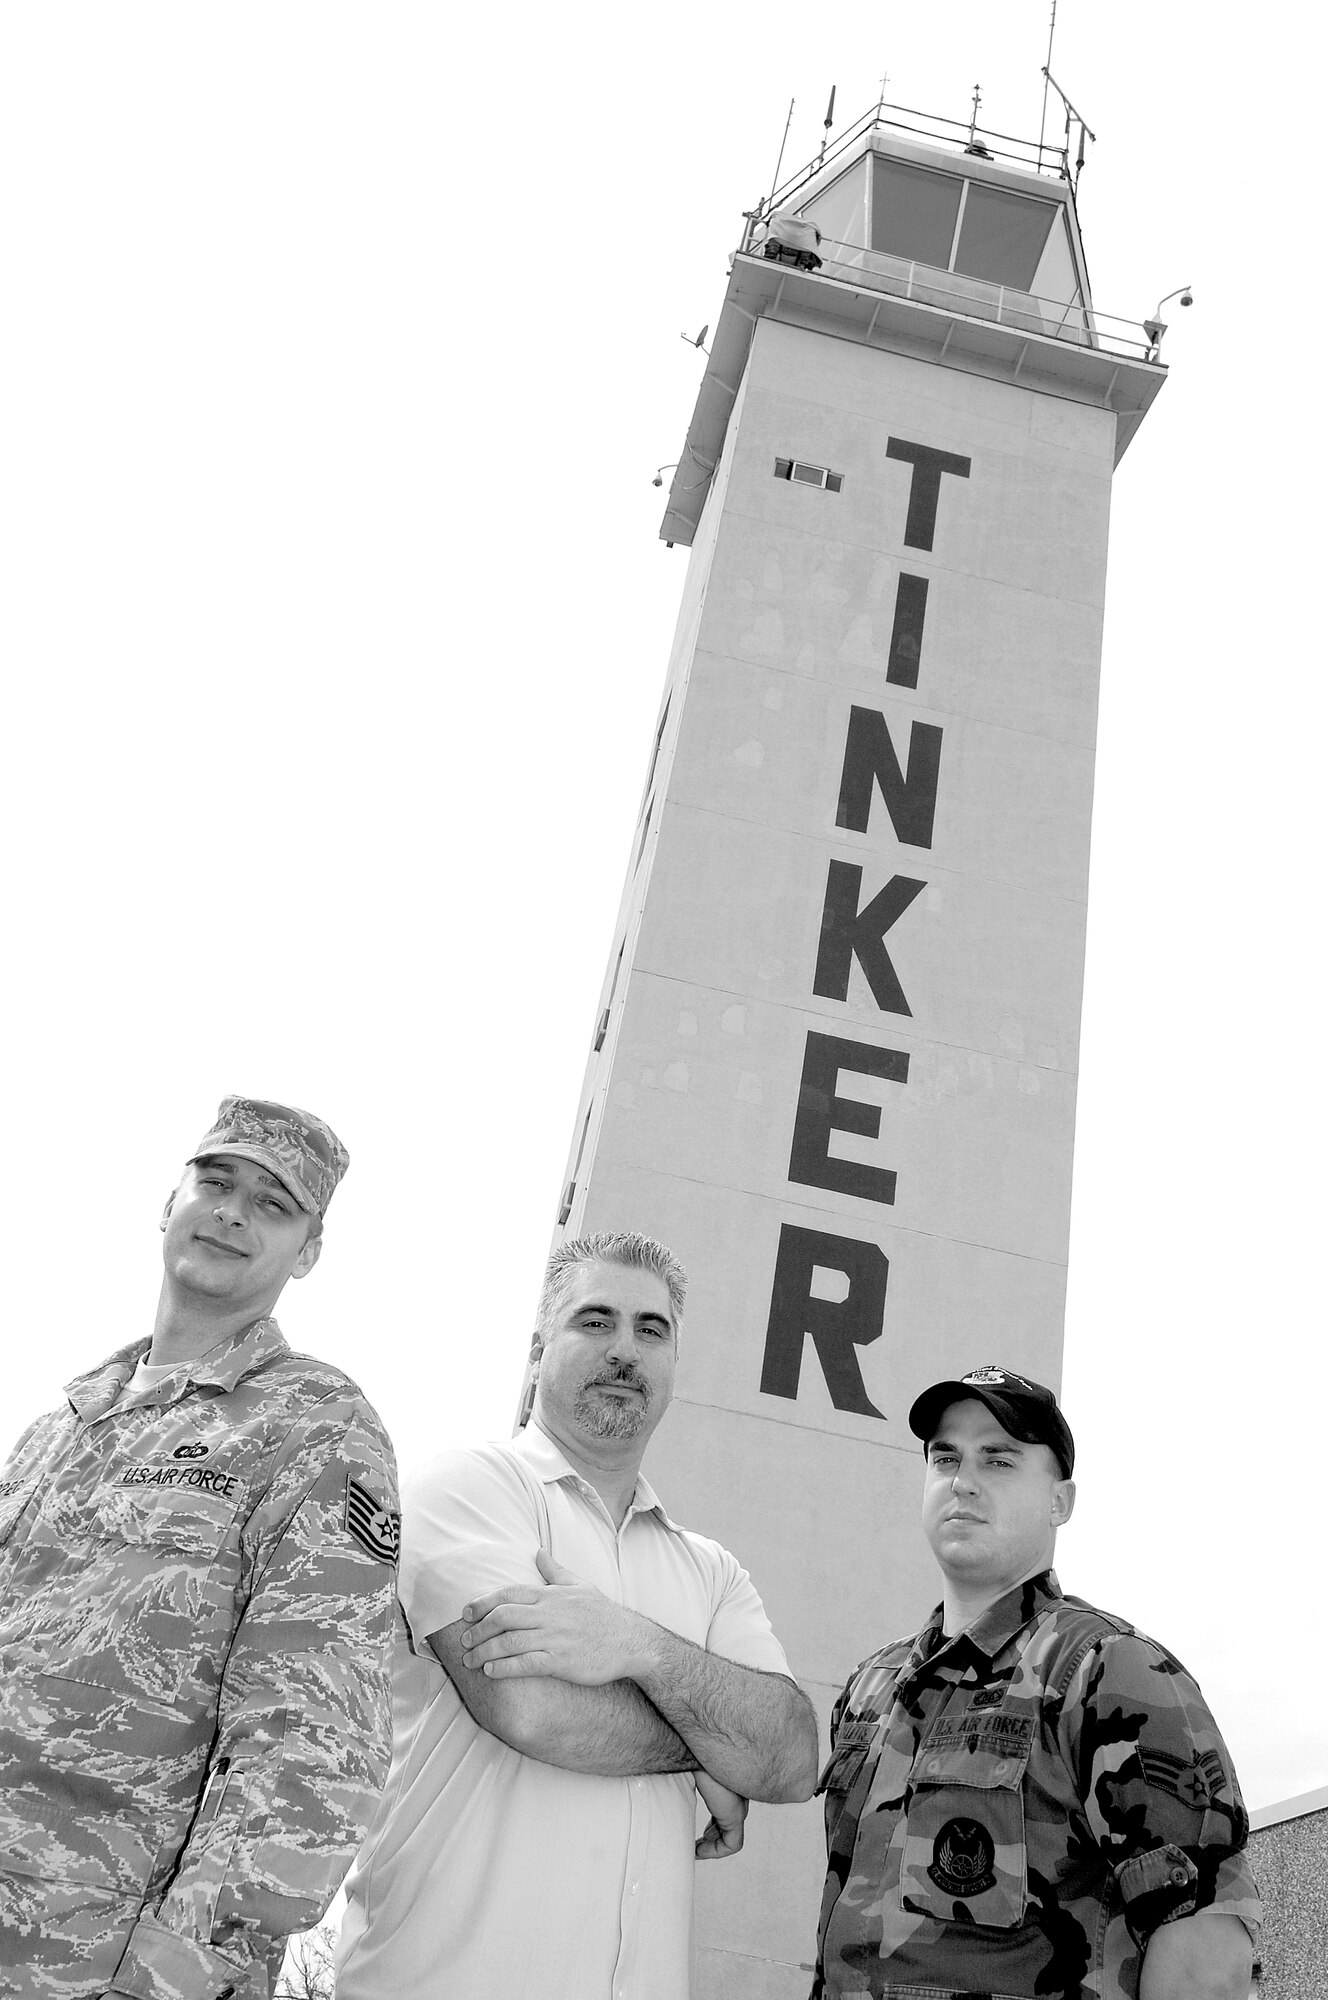 From left: Staff Sgt. David Kopec, Tony Kaczka and Senior Airman Jonathan Chickletts, of the 72nd Operations Support Squadron stand in front of Tinker’s Air Traffic Control Tower where they watch over aircraft arriving and departing the installation and recently helped avert disaster. (Air Force photo/Margo Wright)